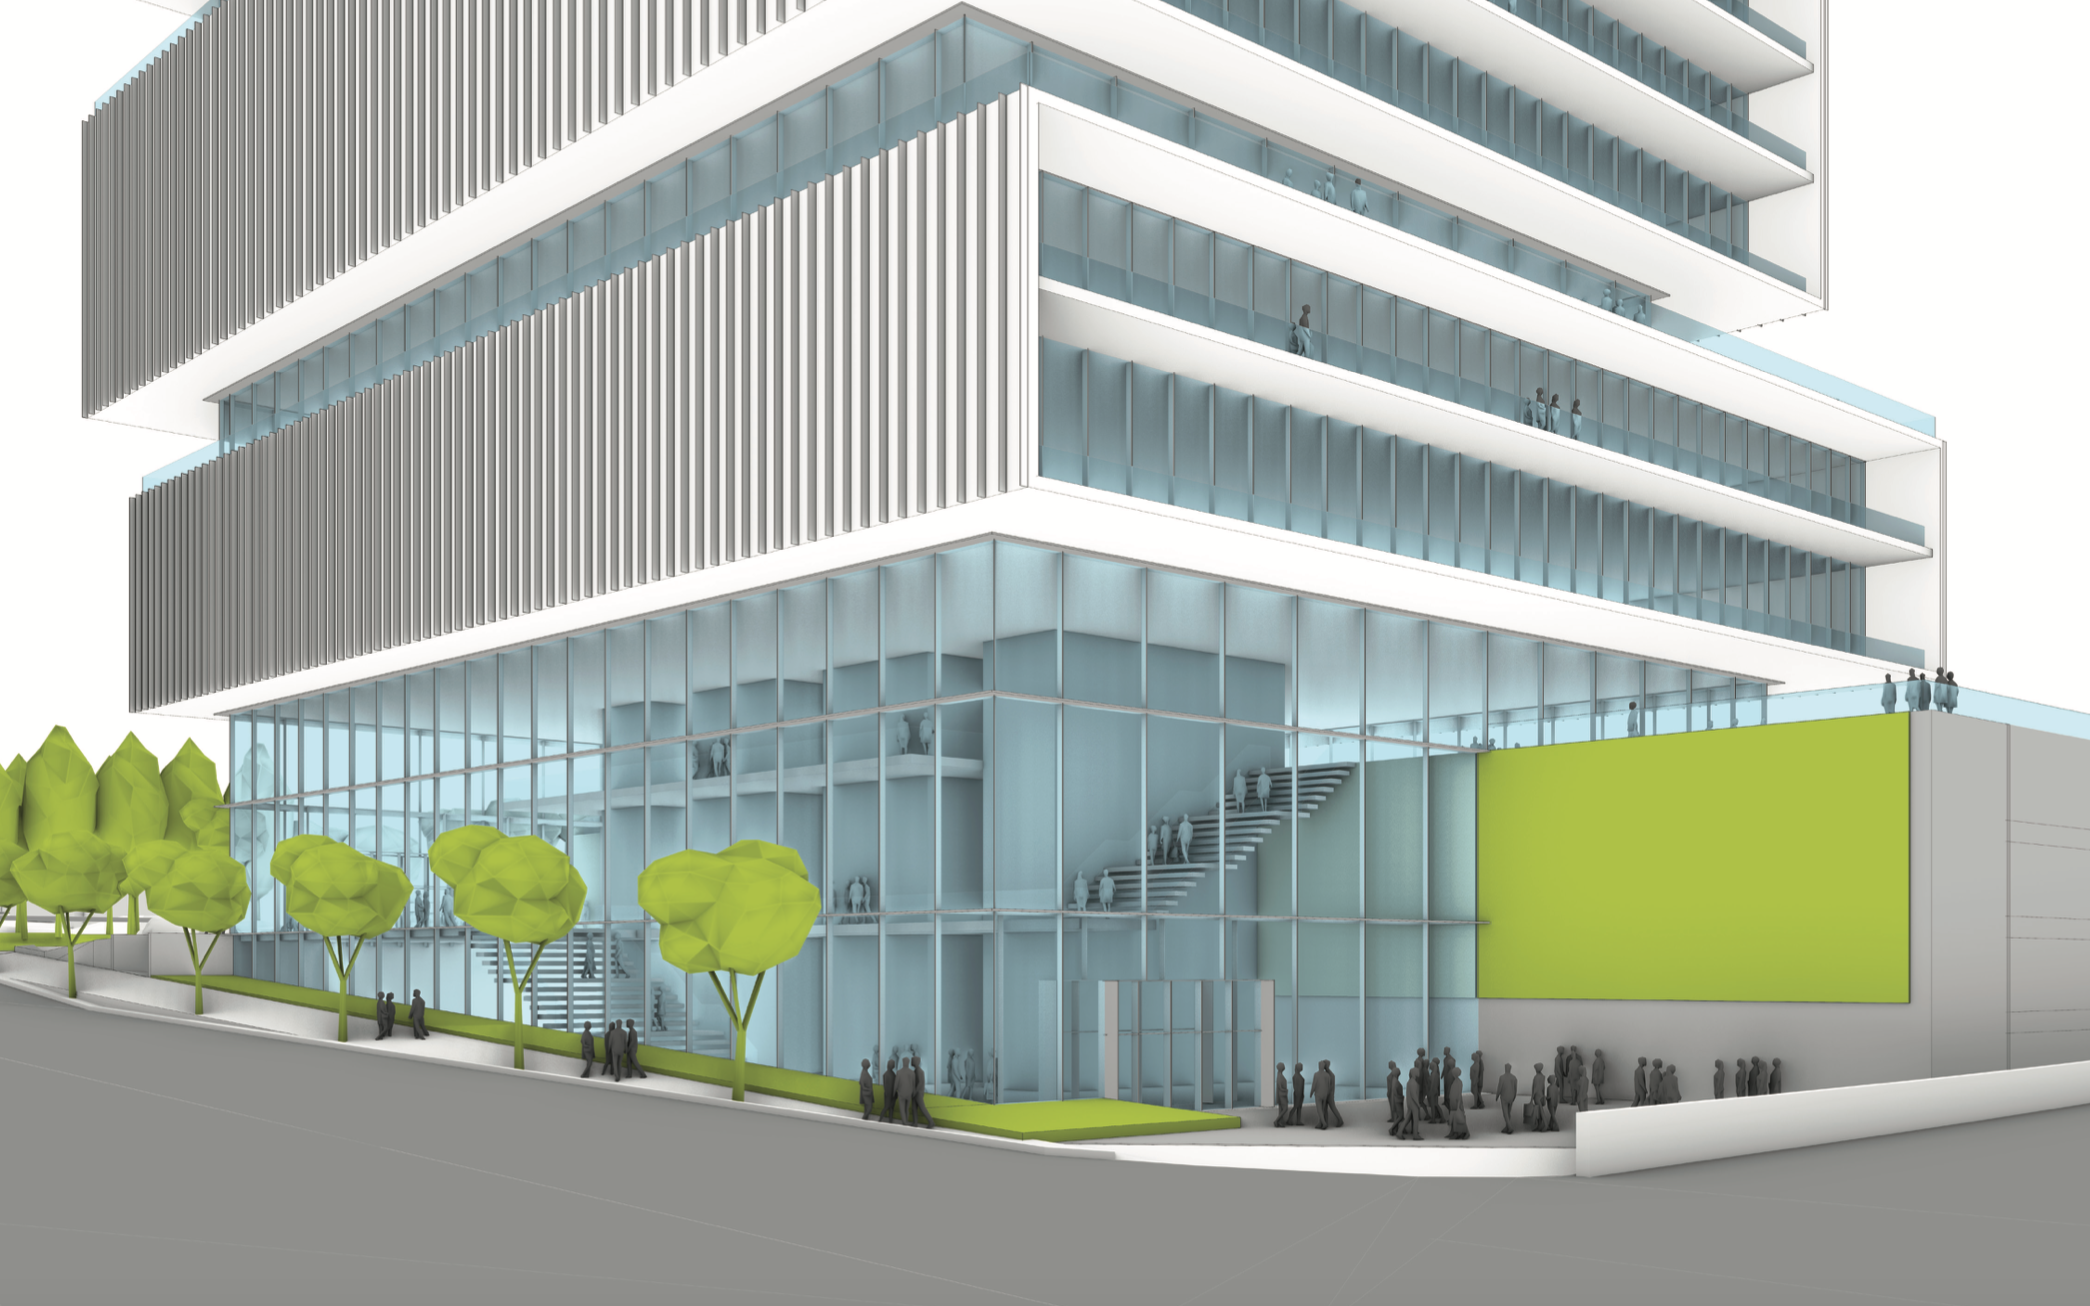 24-Story Mixed-Use Office Tower Proposed on 112th Ave NE